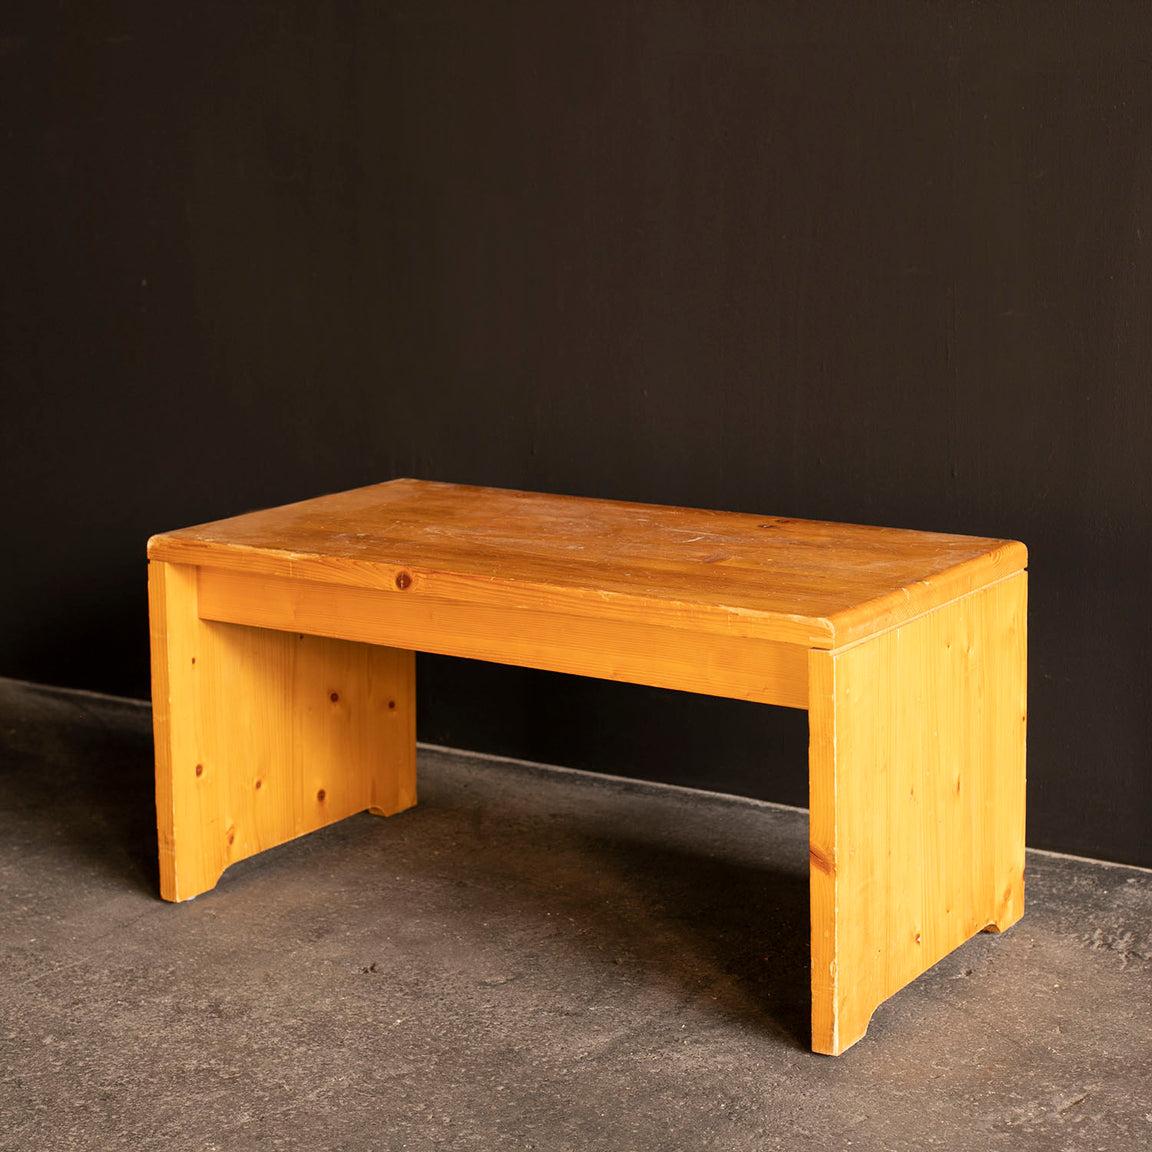 A low table designed for 